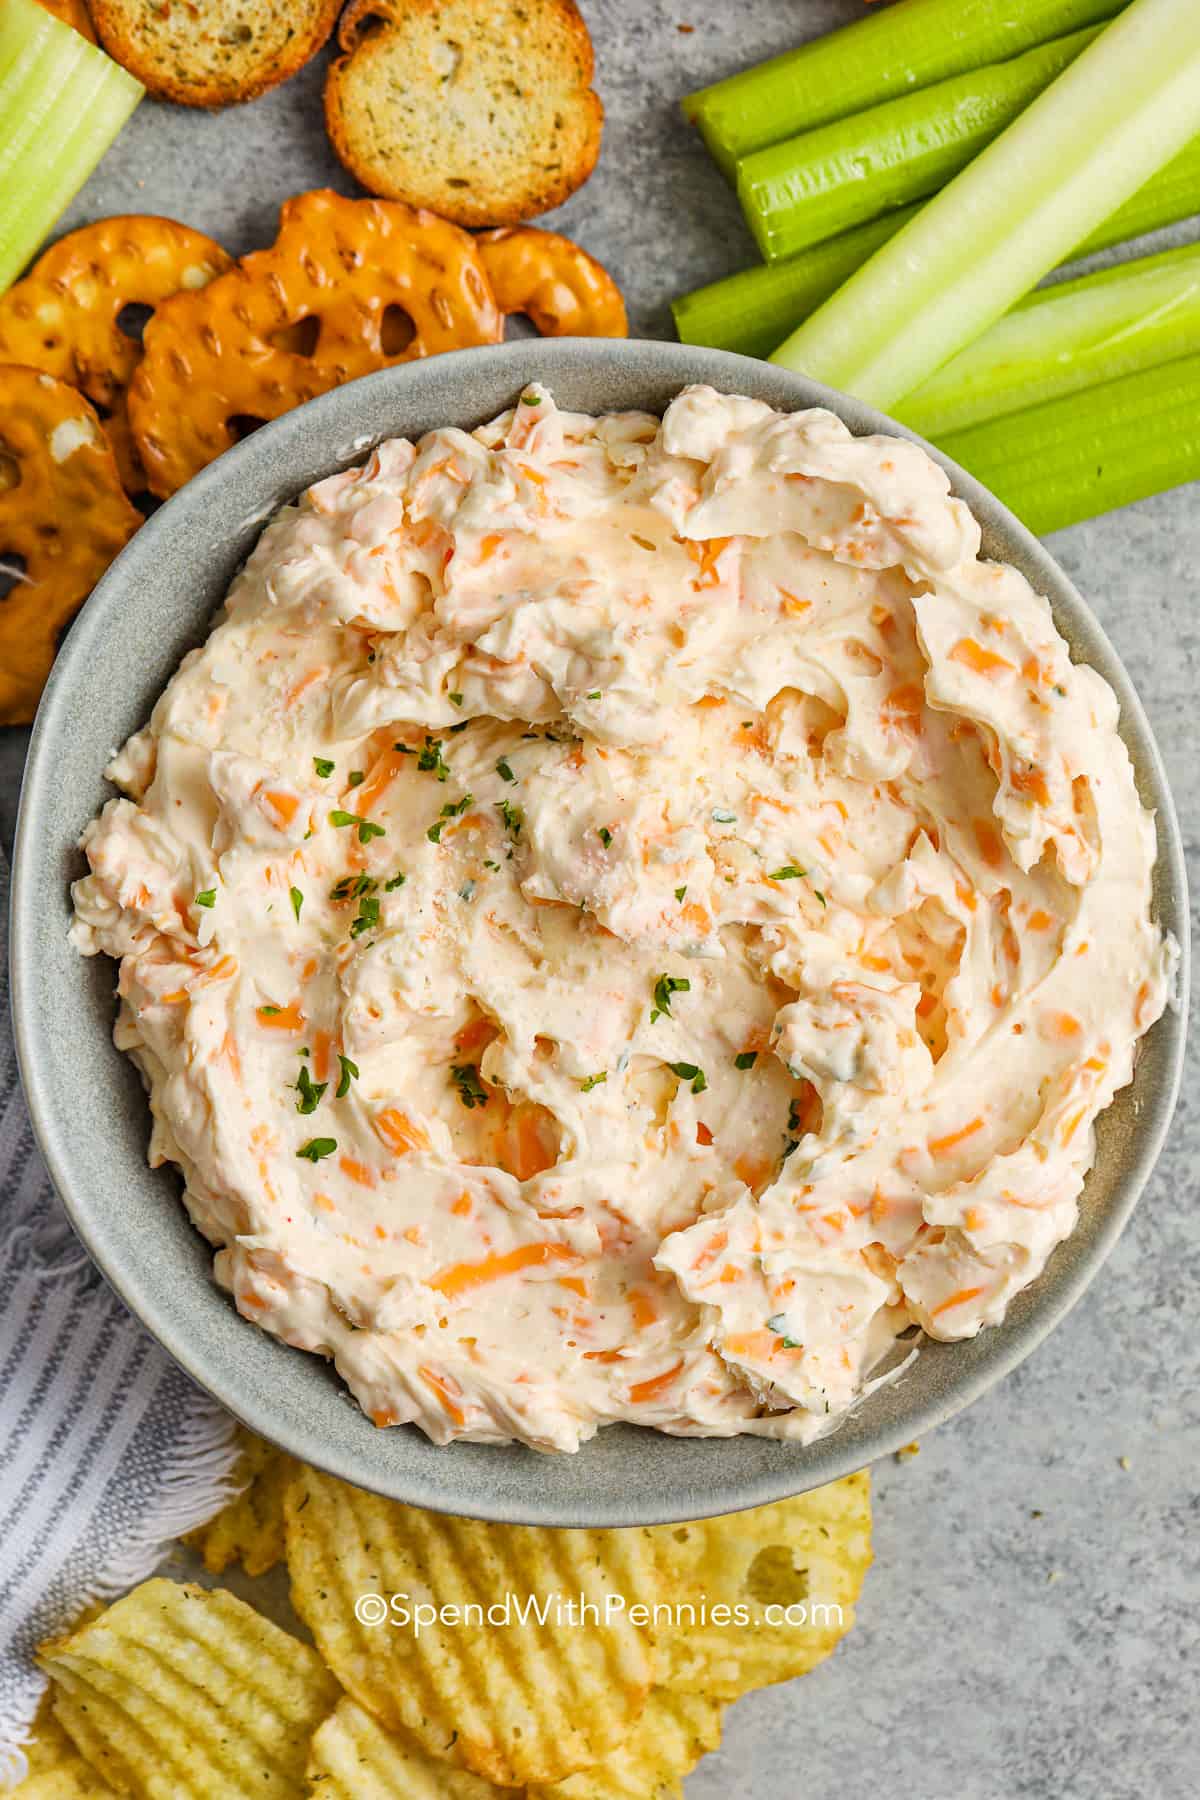 cheese dip in a bowl with chips and veggies for dipping